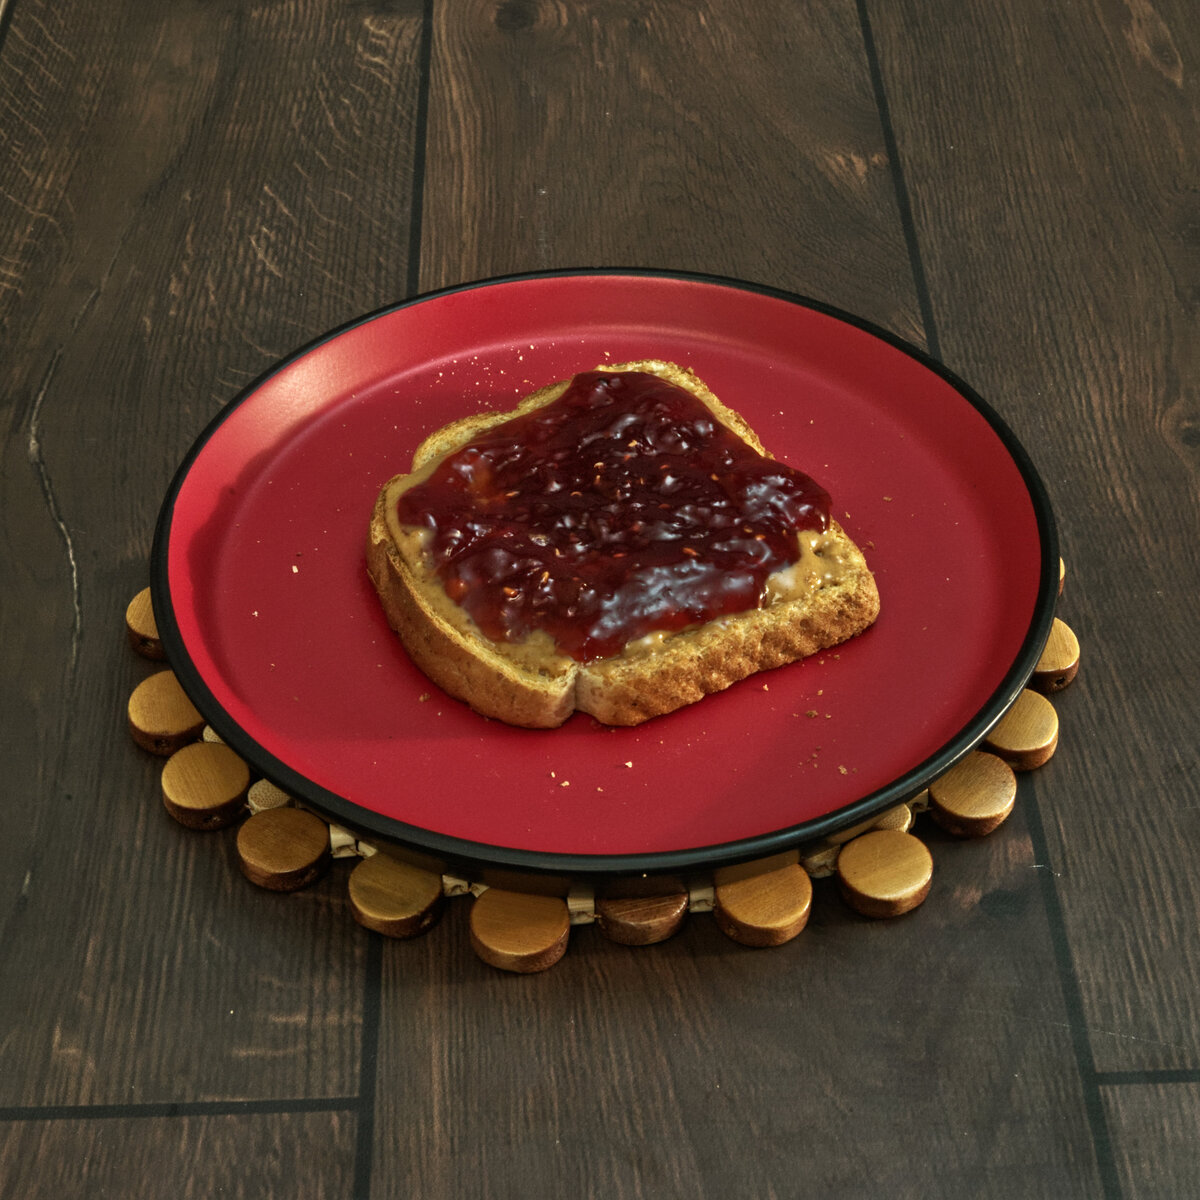 Peanut Butter and Raspberry Preserve Toast